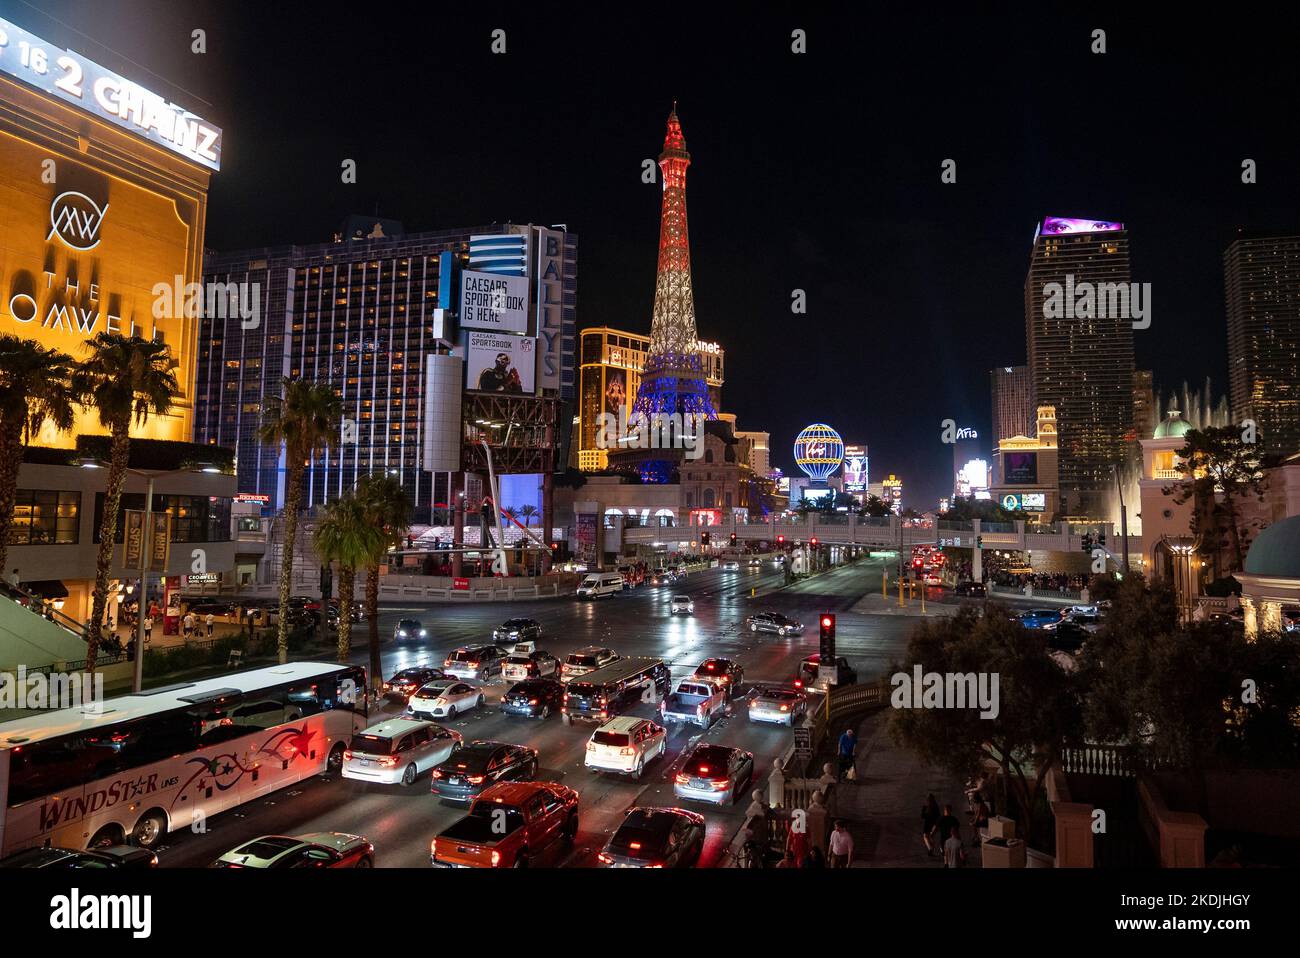 Replica of Eiffel tower seen from road in Las Vegas city at night Stock Photo